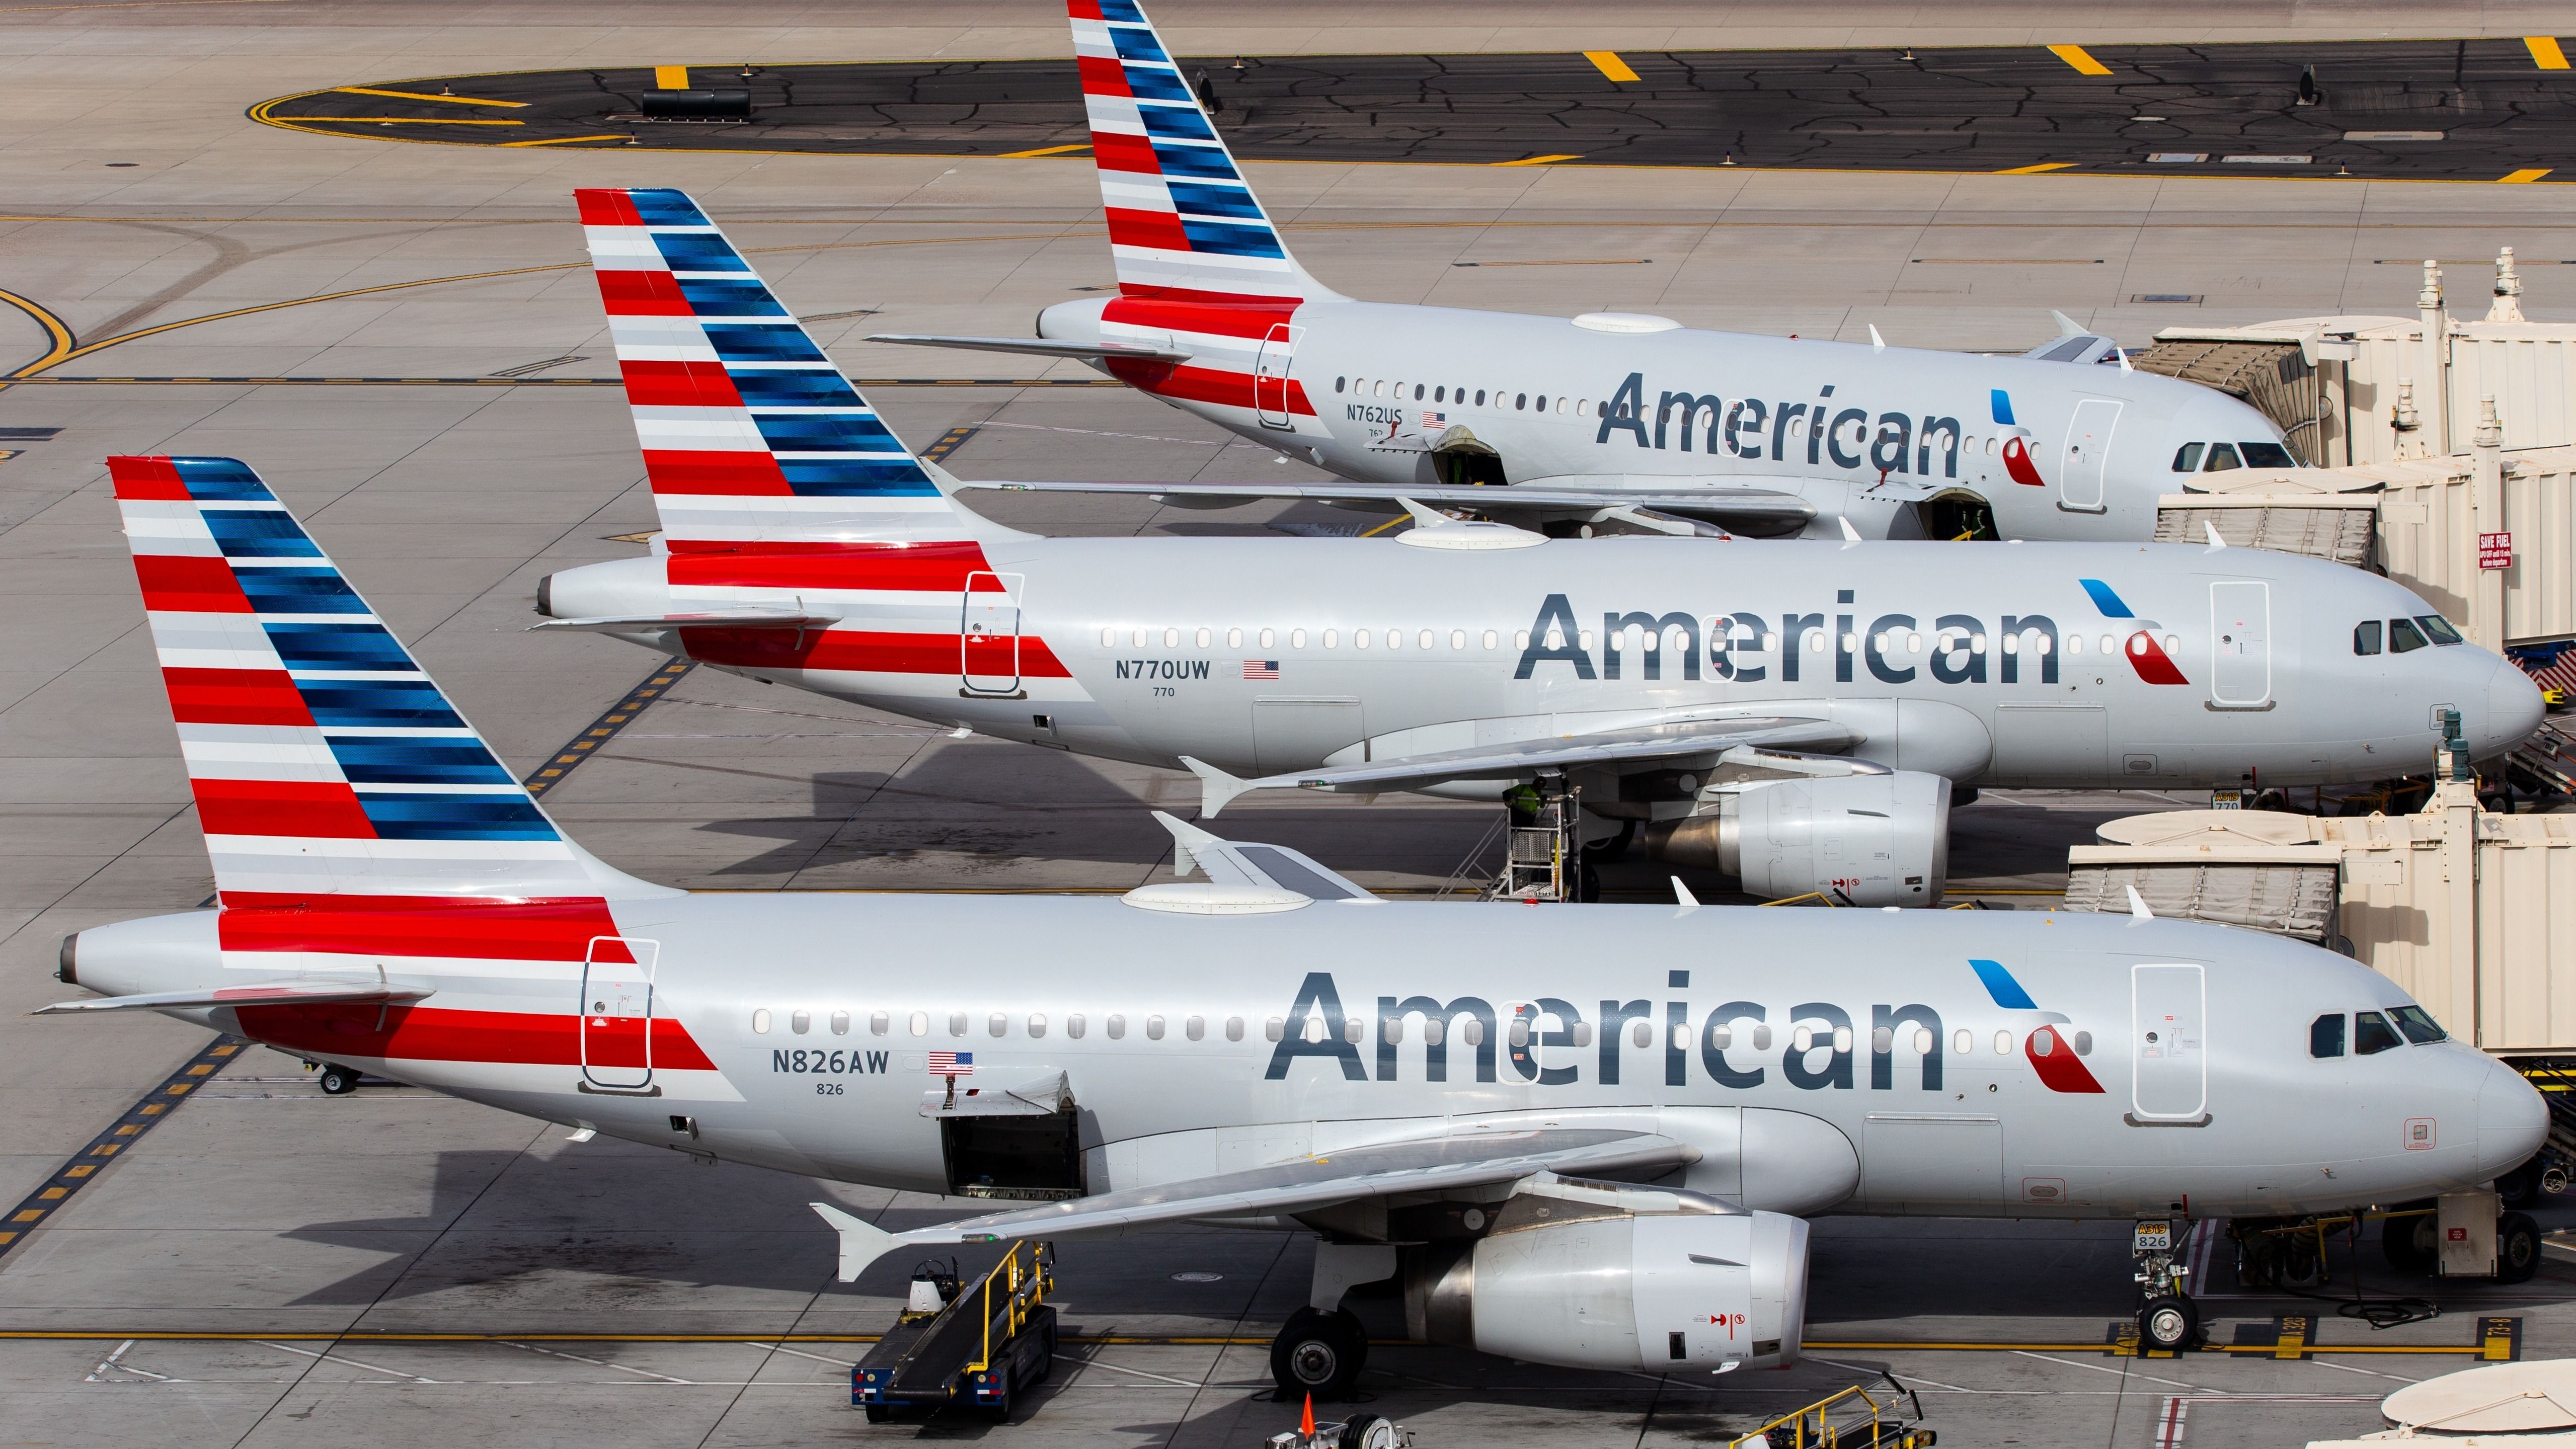 Three American Airlines aircraft